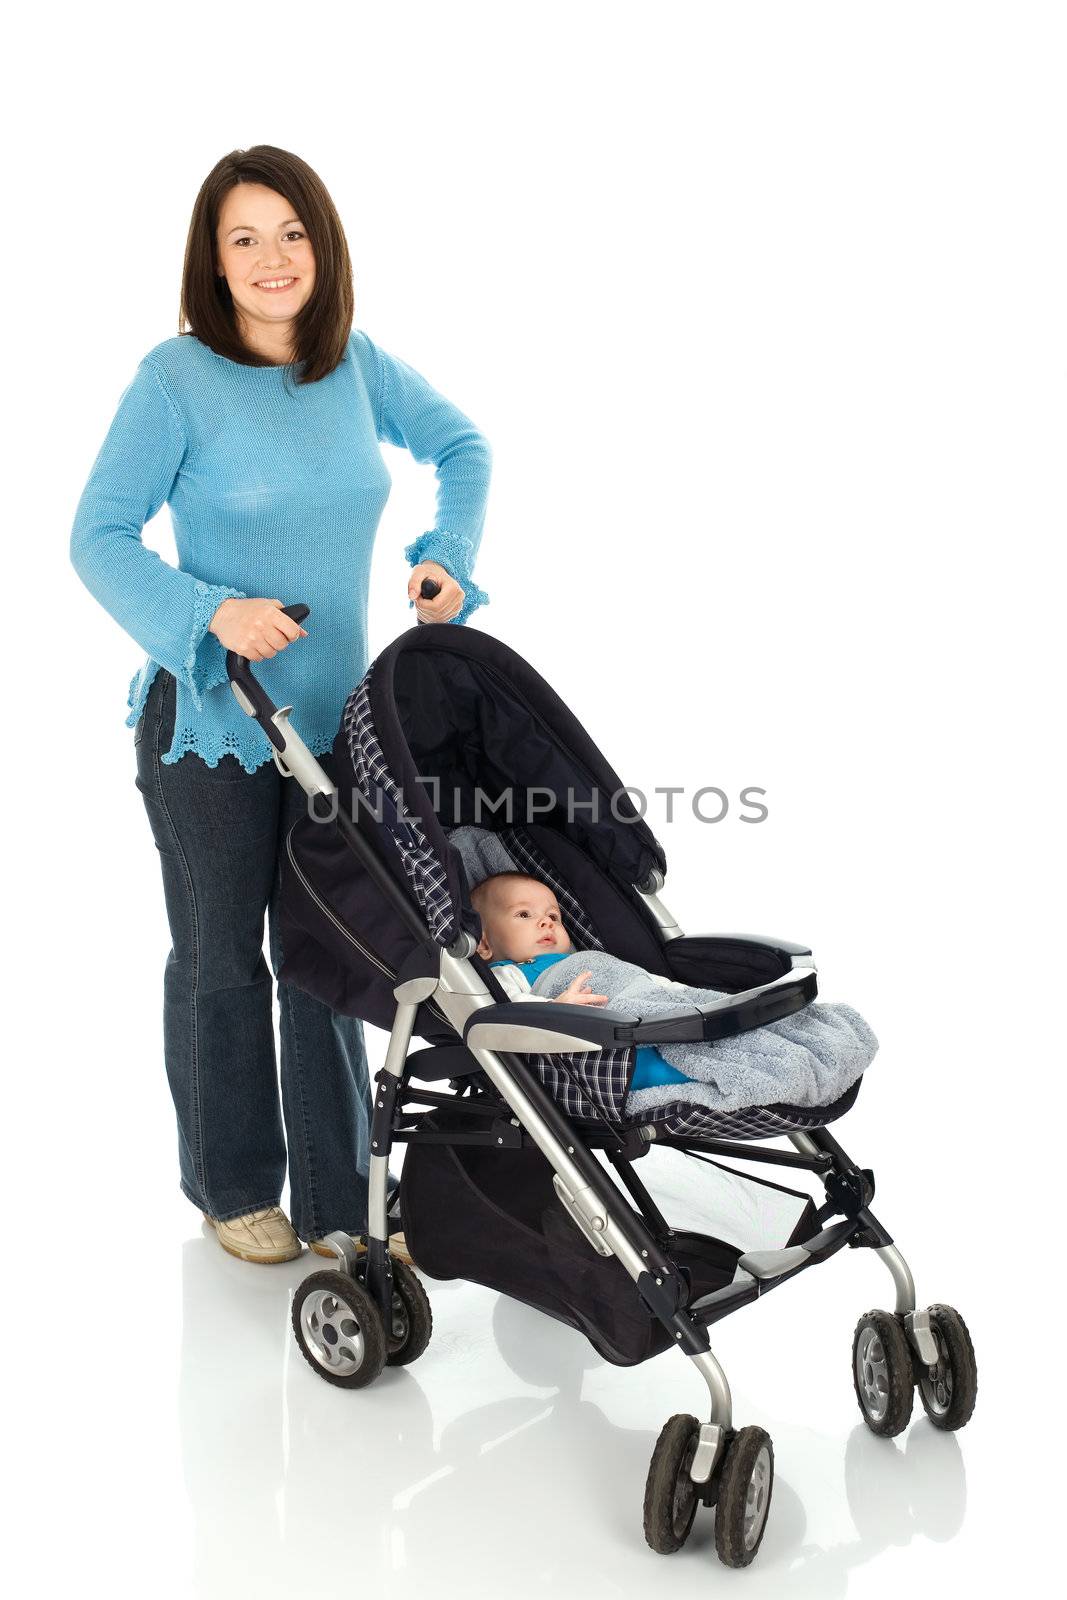 Mother take a walk with baby in pram, Isolated on white background